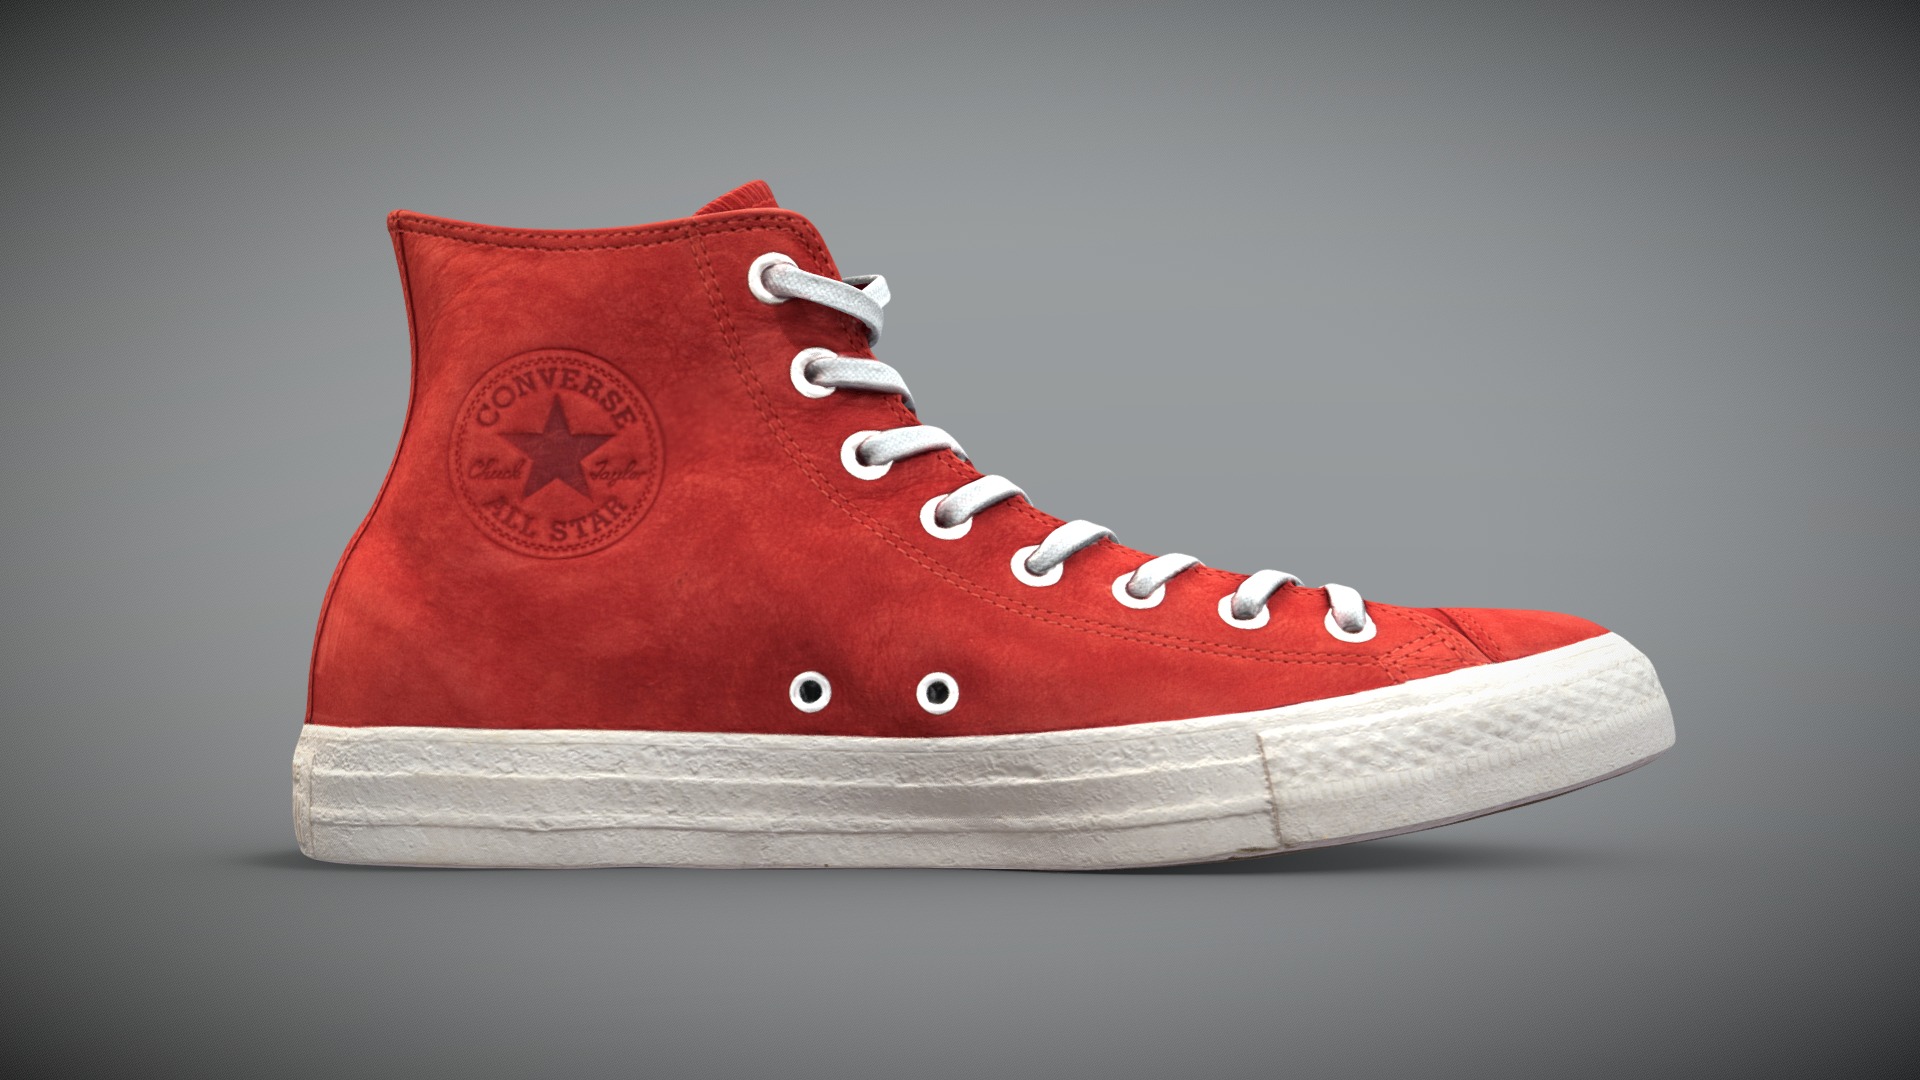 3D model Converse All Star (Red leather) - This is a 3D model of the Converse All Star (Red leather). The 3D model is about a red and white shoe.